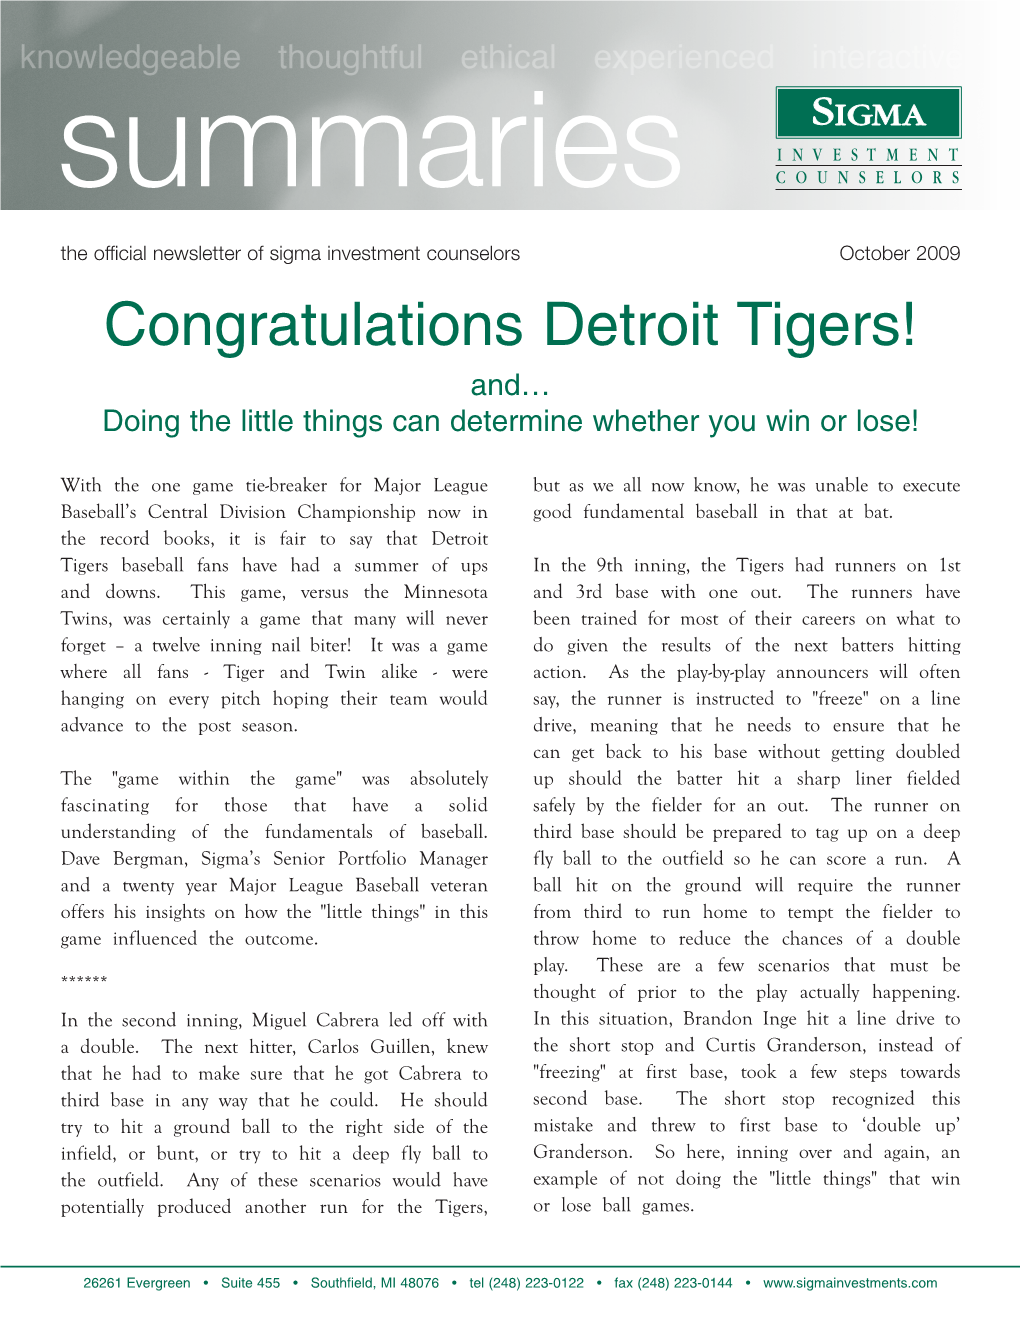 Congratulations Detroit Tigers! And… Doing the Little Things Can Determine Whether You Win Or Lose!